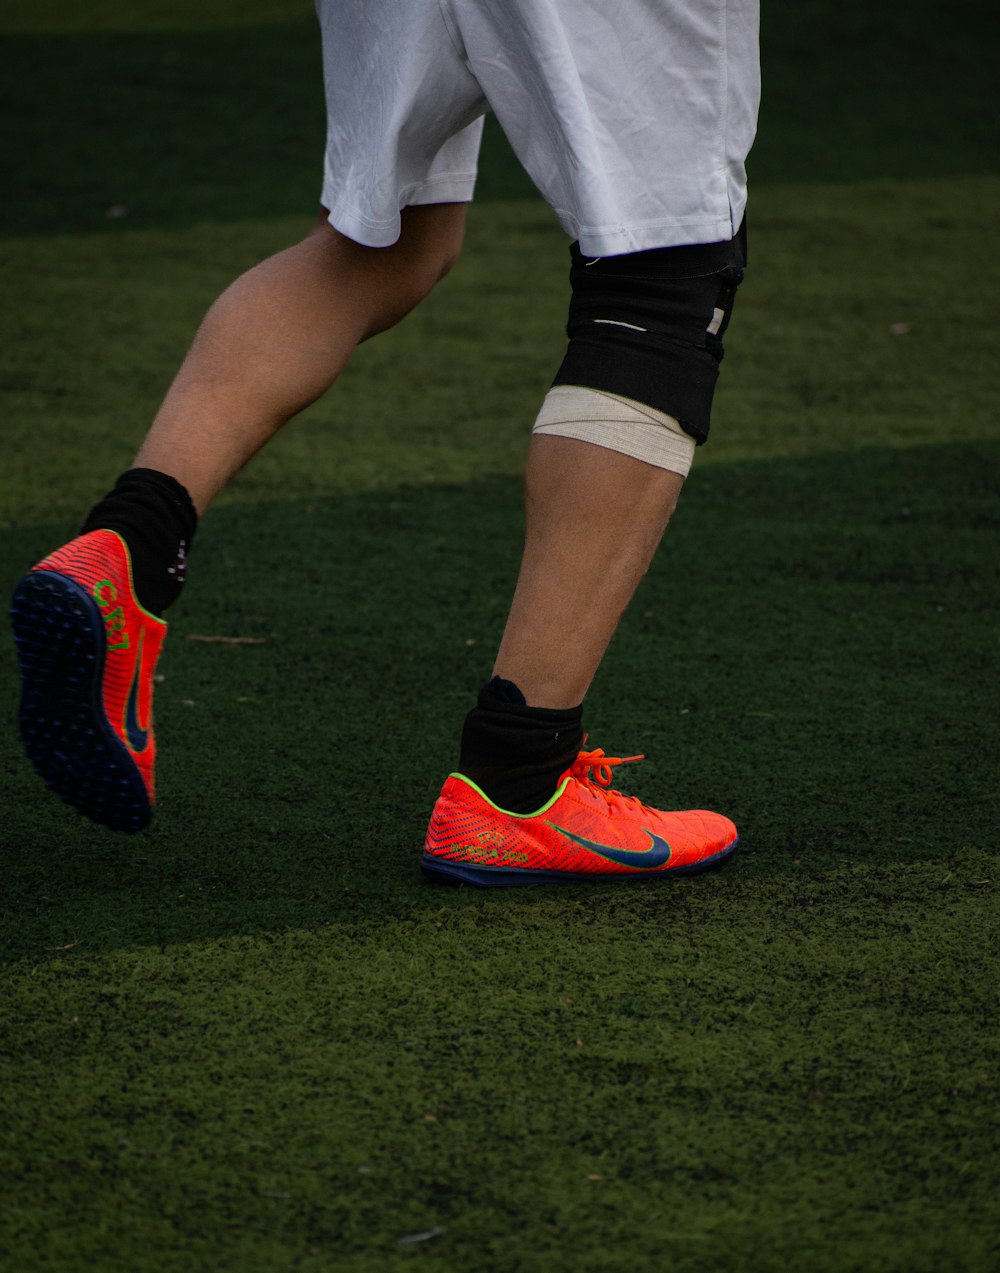 a close up of a soccer player's shoes on the field